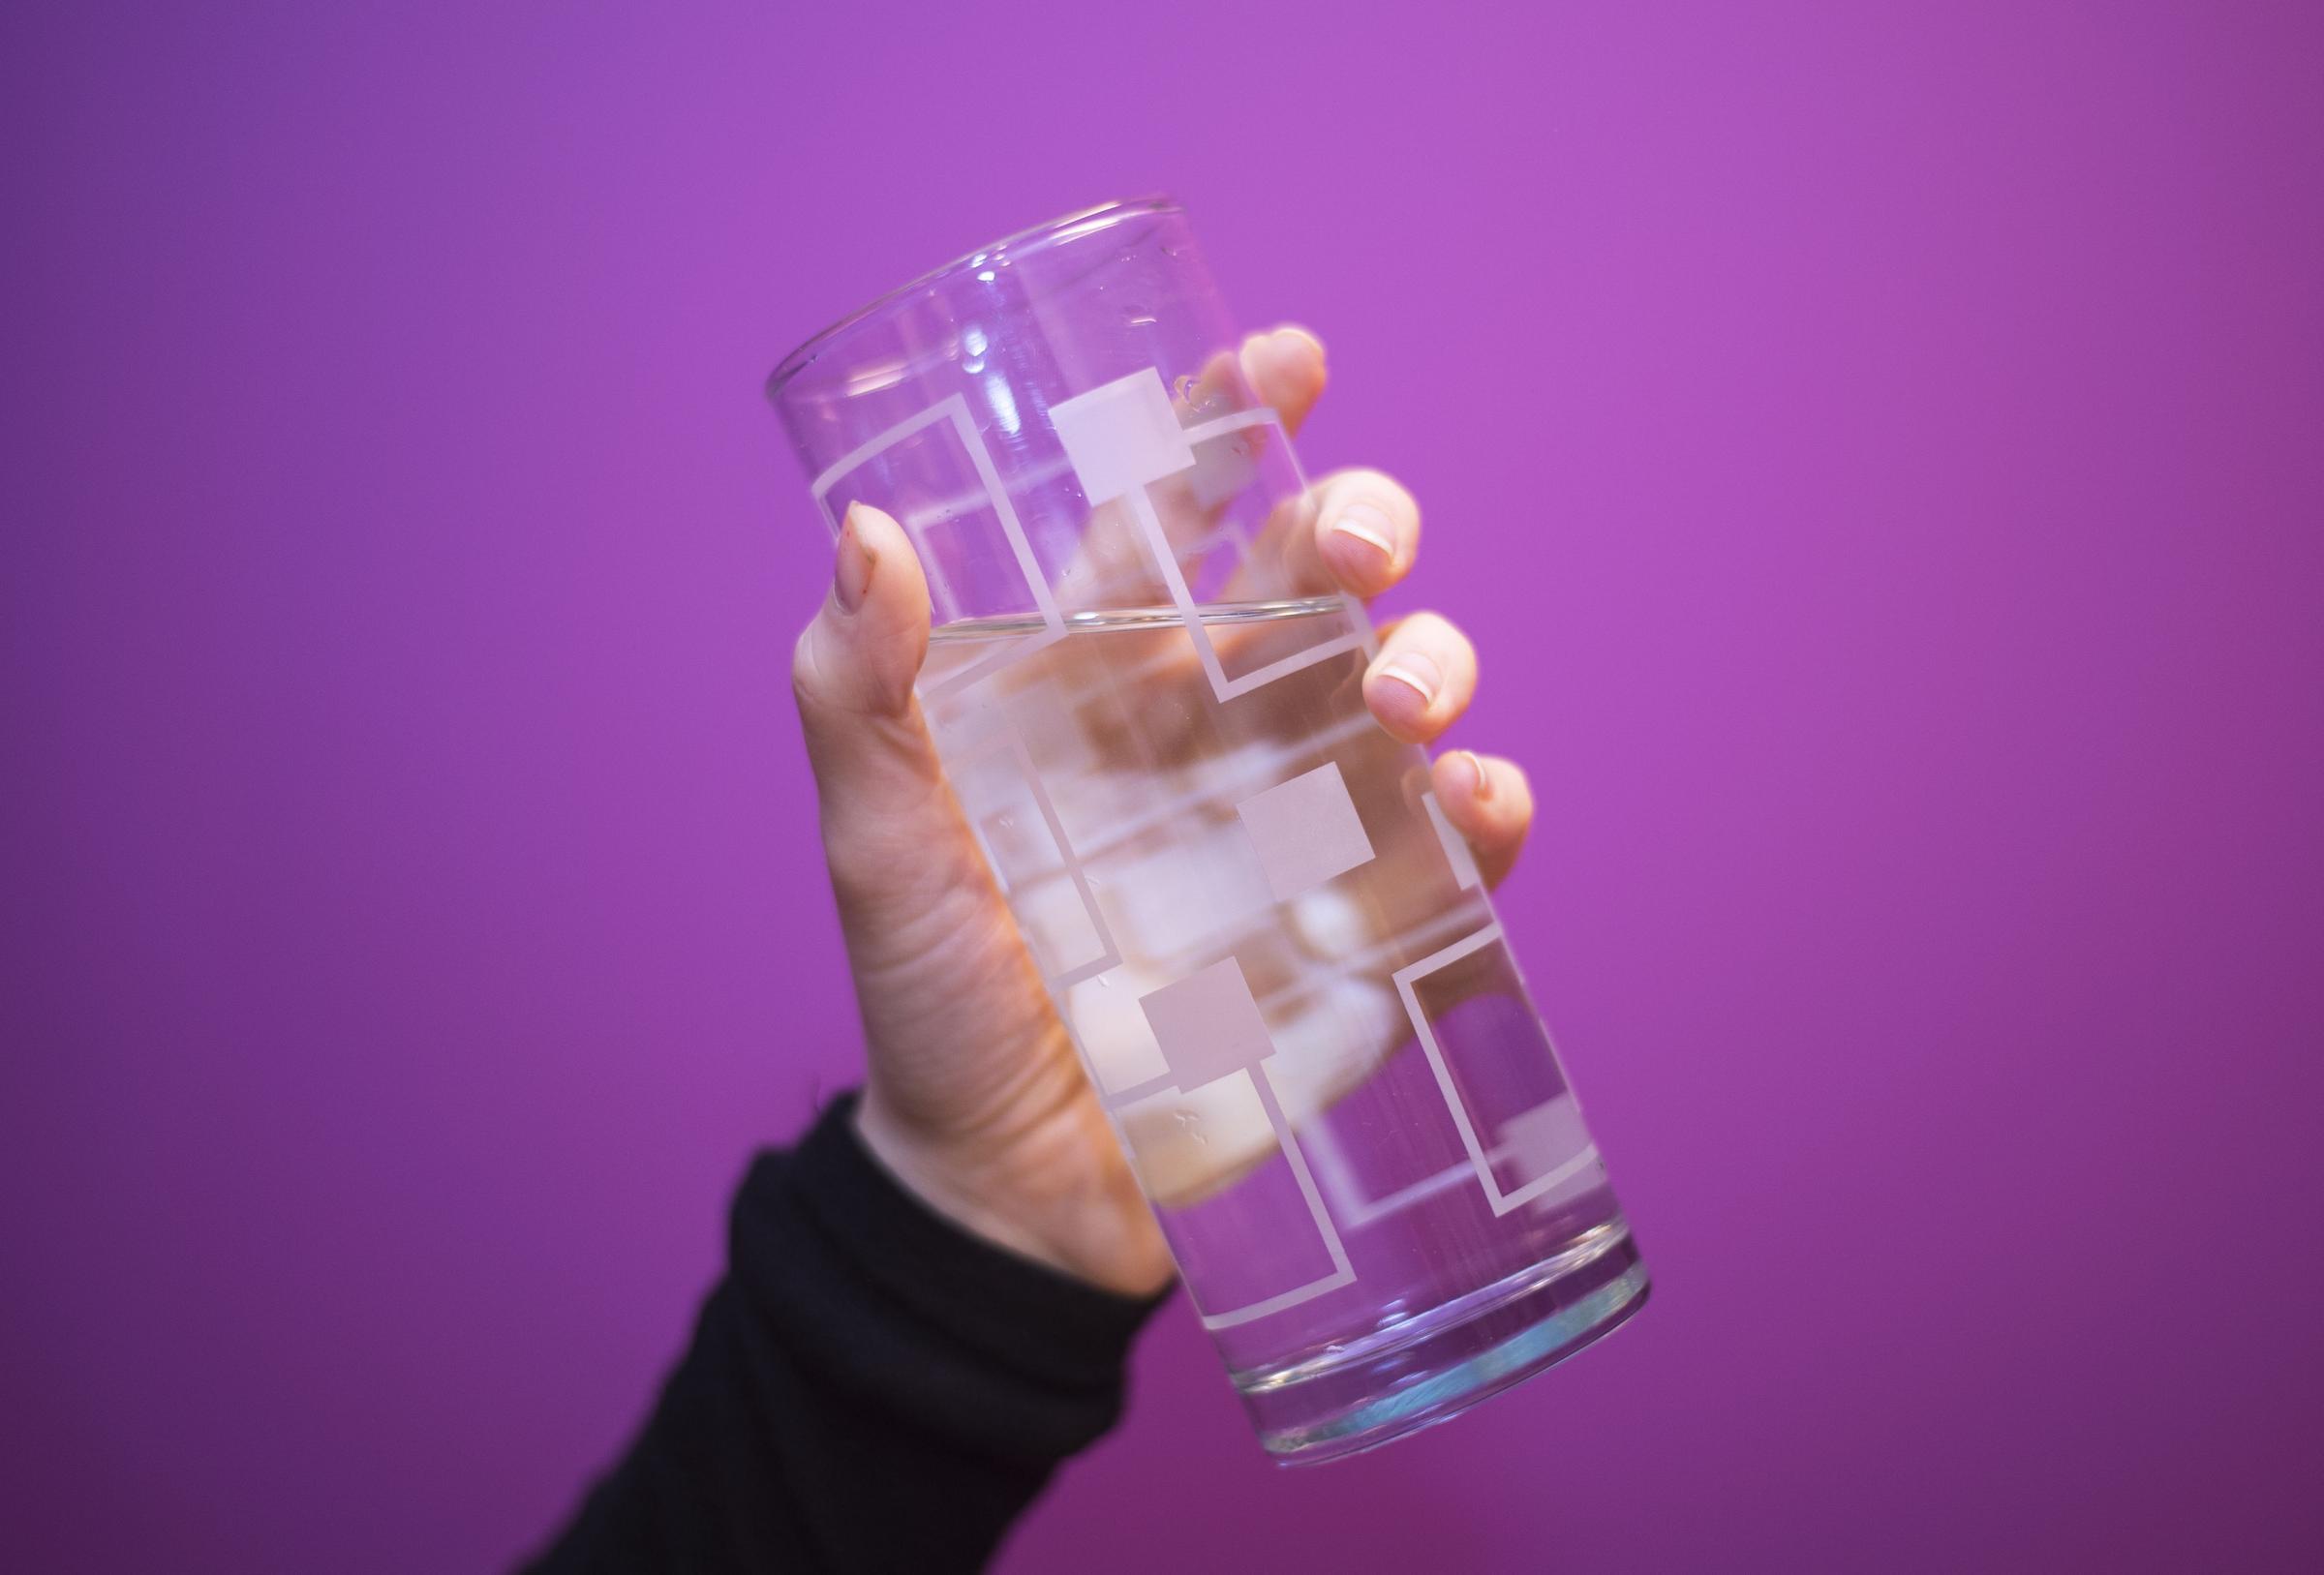 Advice to 'drink plenty of water' when you’re unwell could actually be bad for you, doctors warn